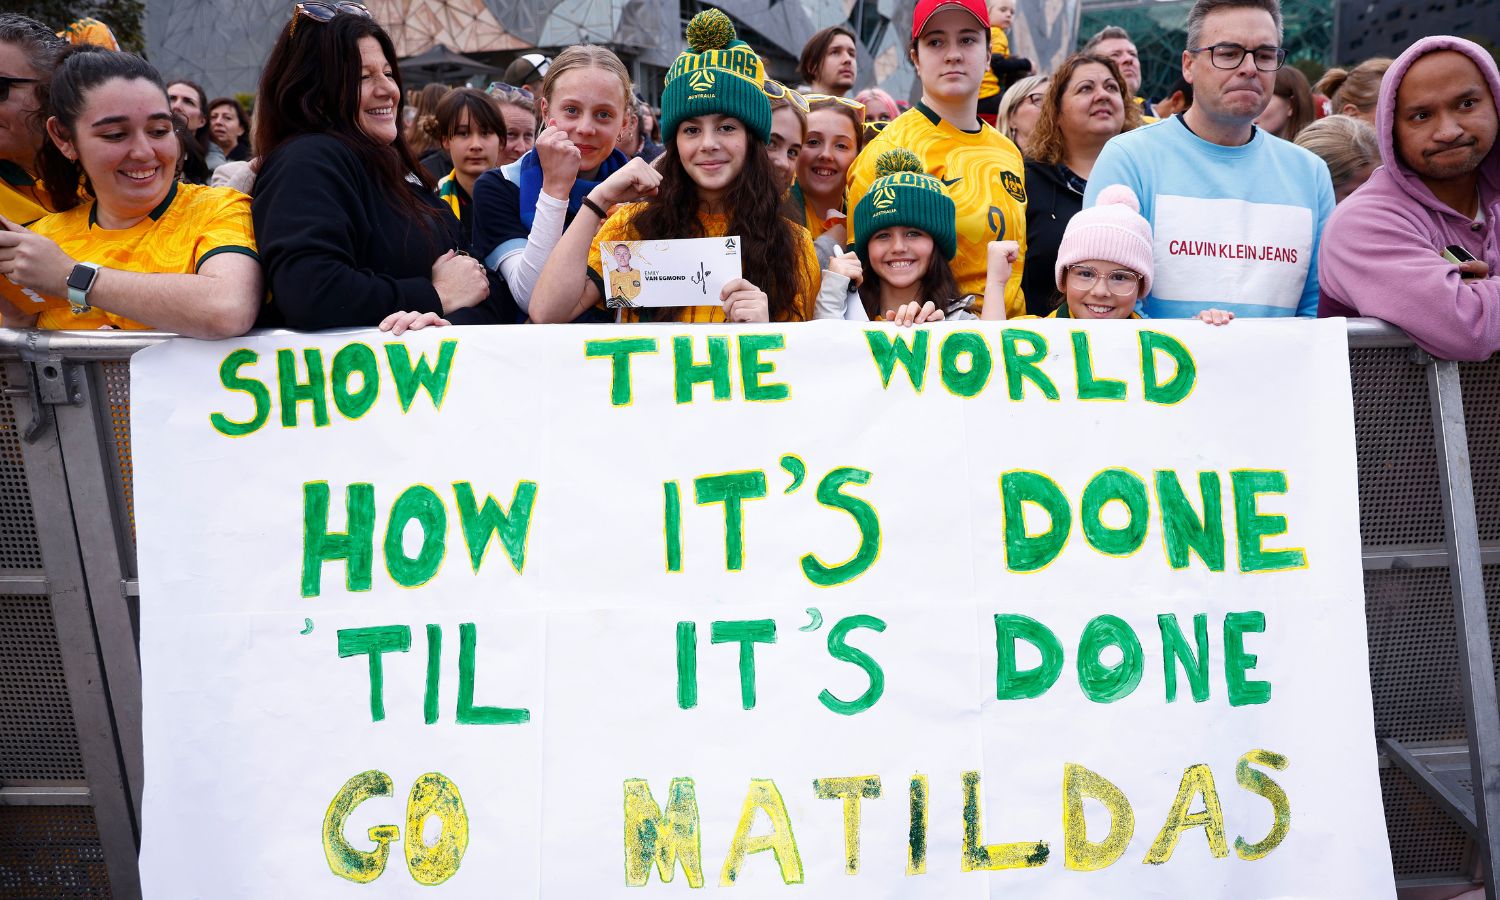 An image showing matildas fans for the 2023 fifa womens world cup